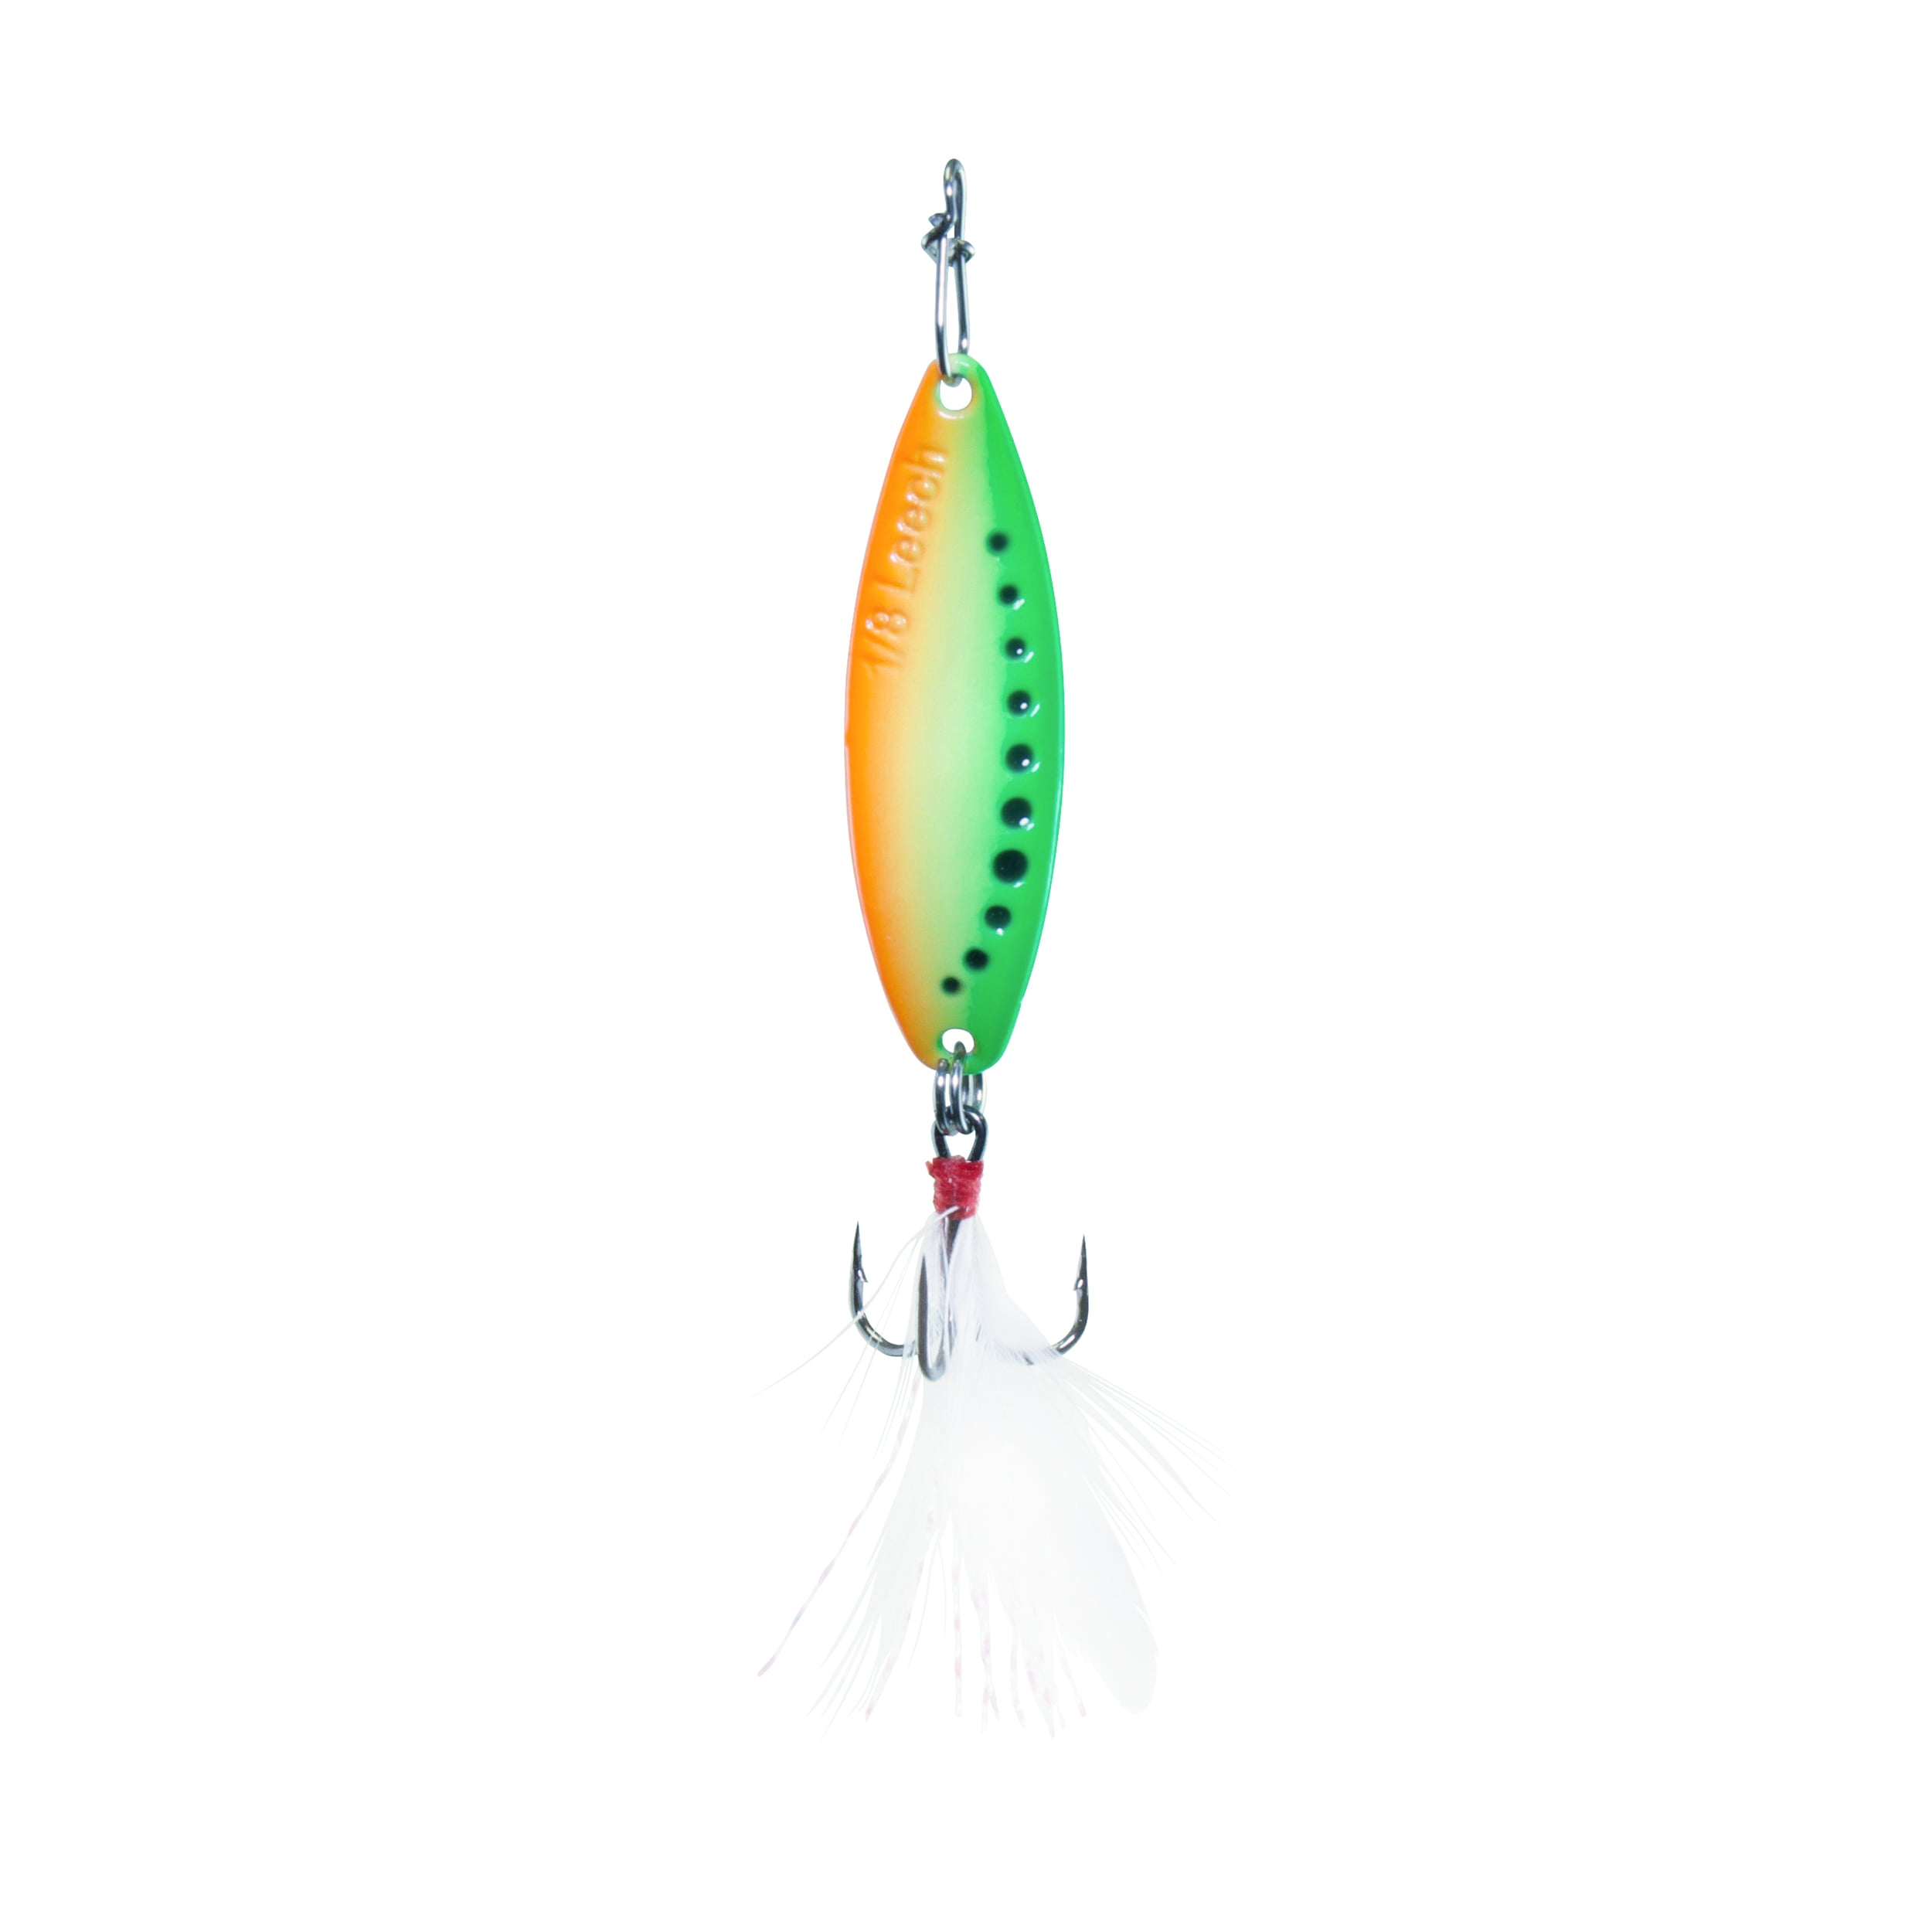 Clam Leech Flutter Spoon Size 8 10 or 12 Ice Fishing Jig Choose Glow UV Color 